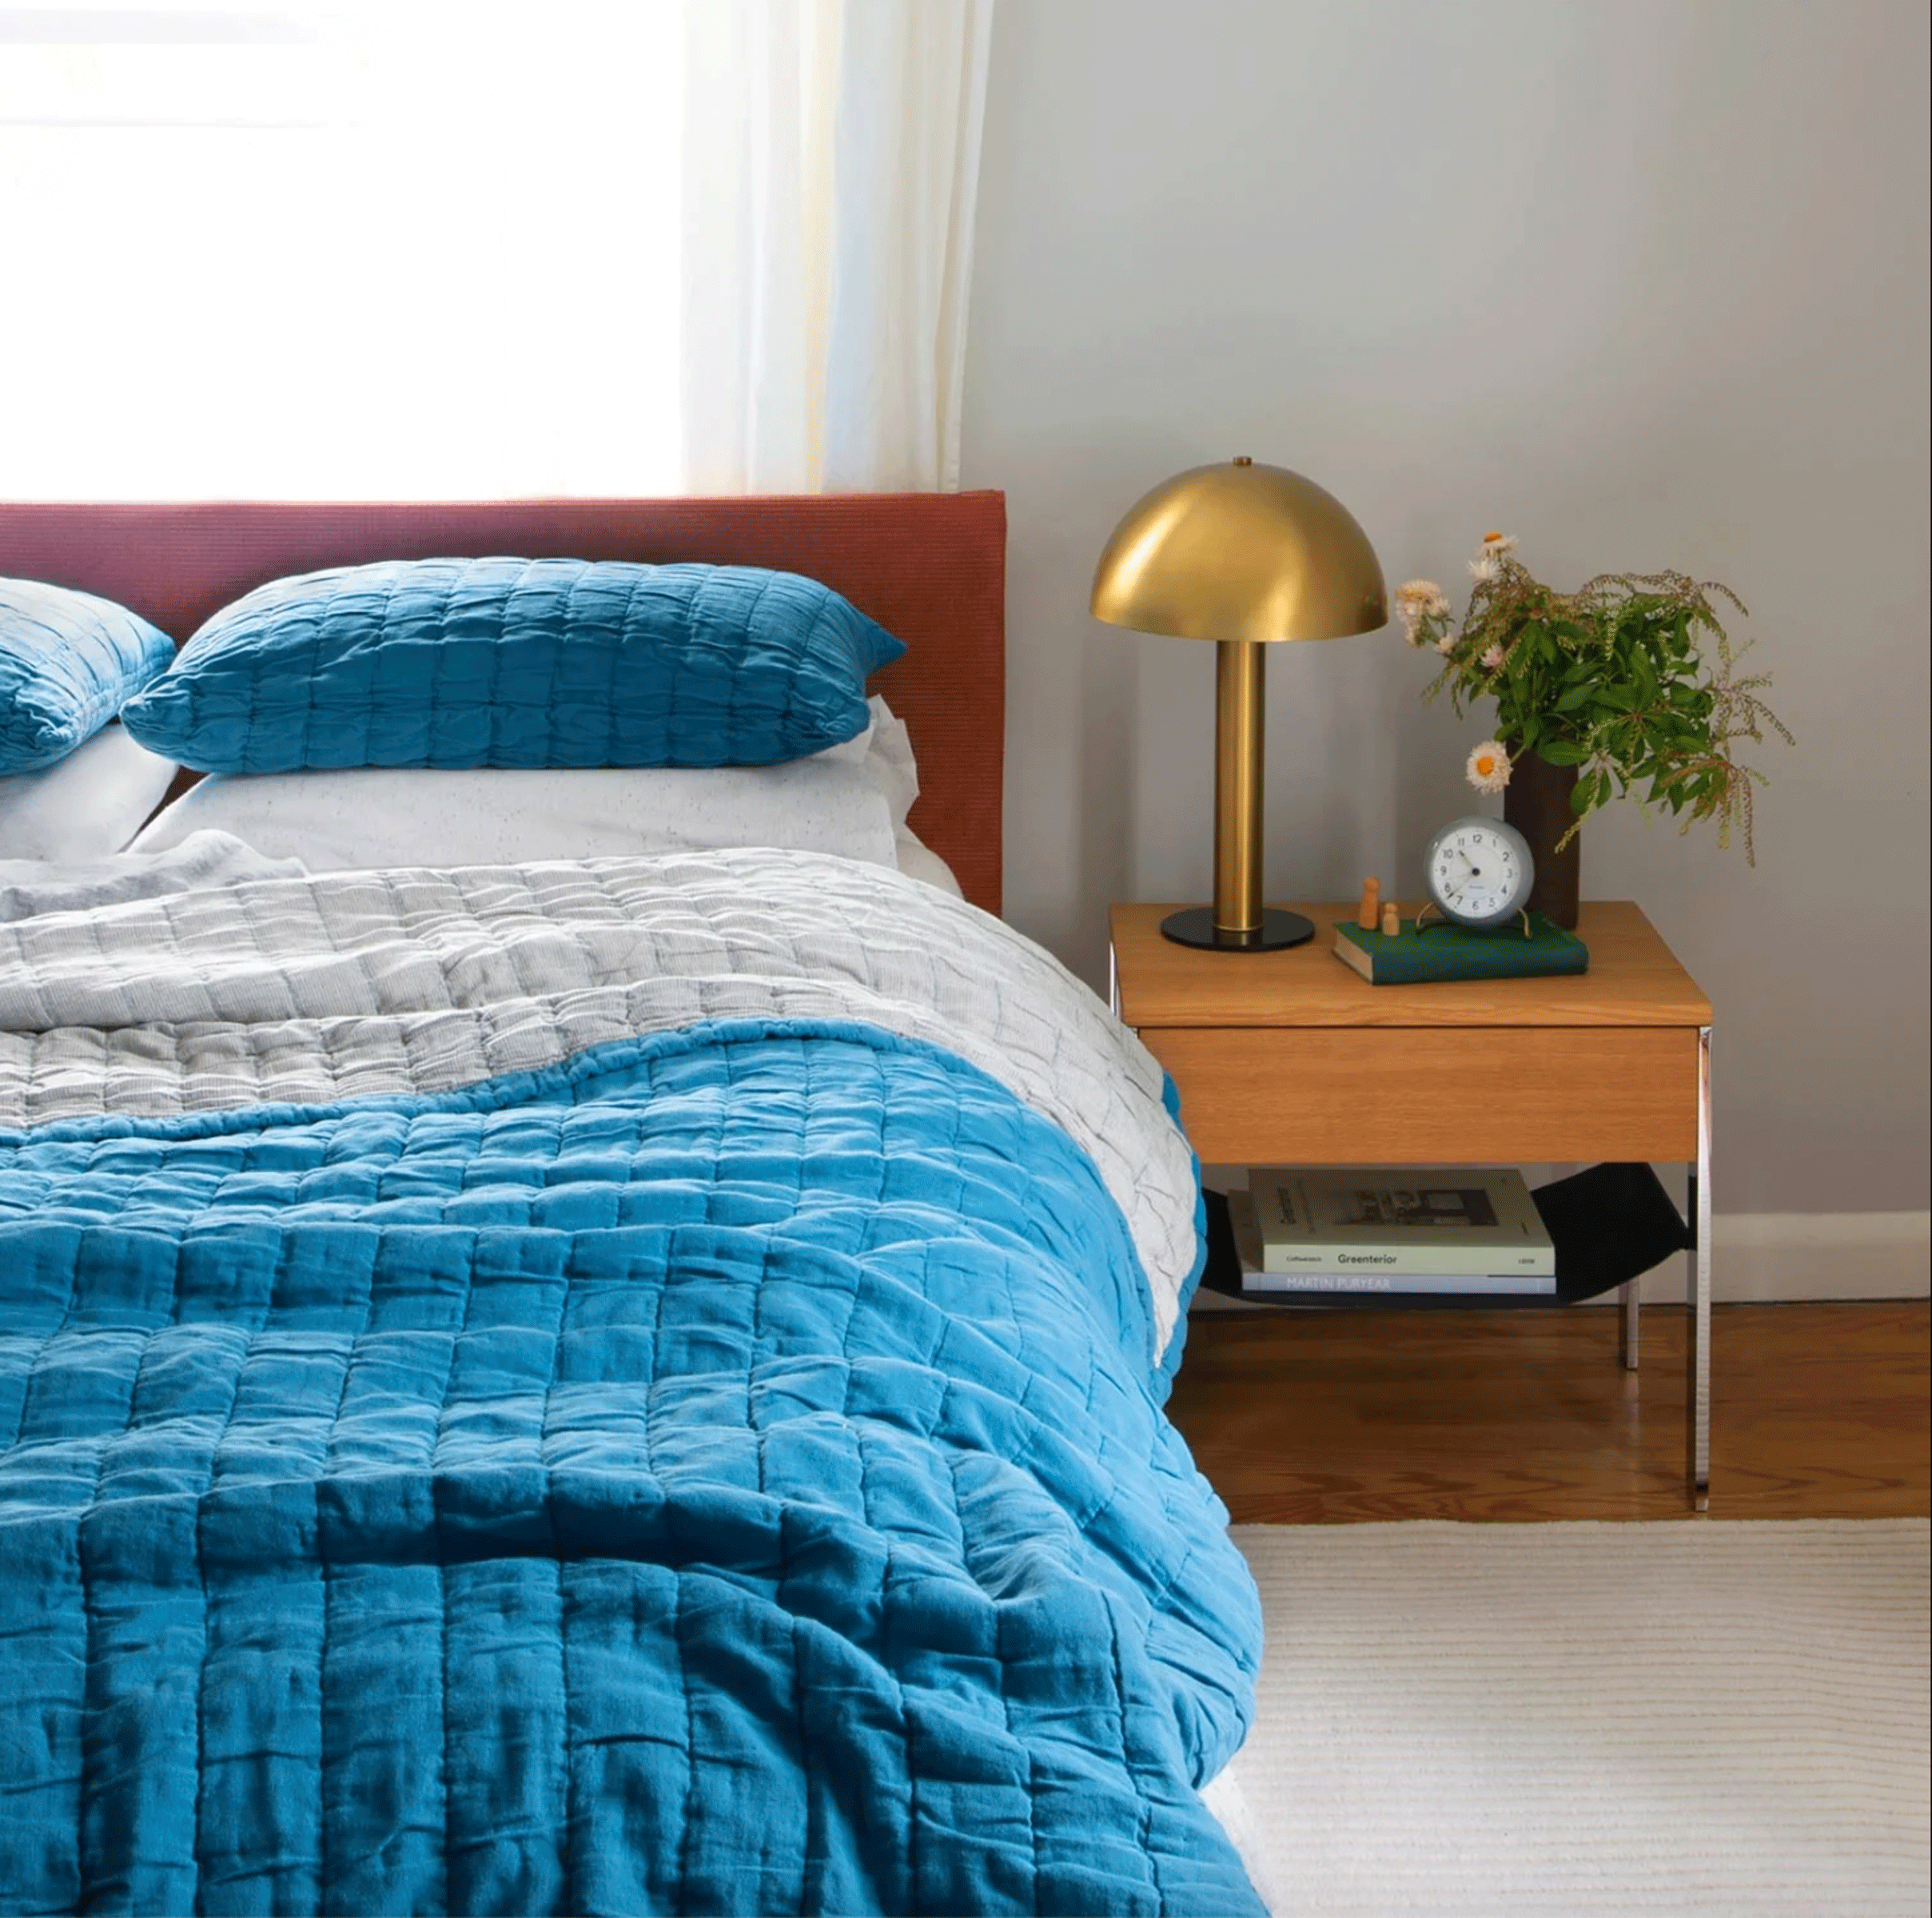 A bed with a blue comforter